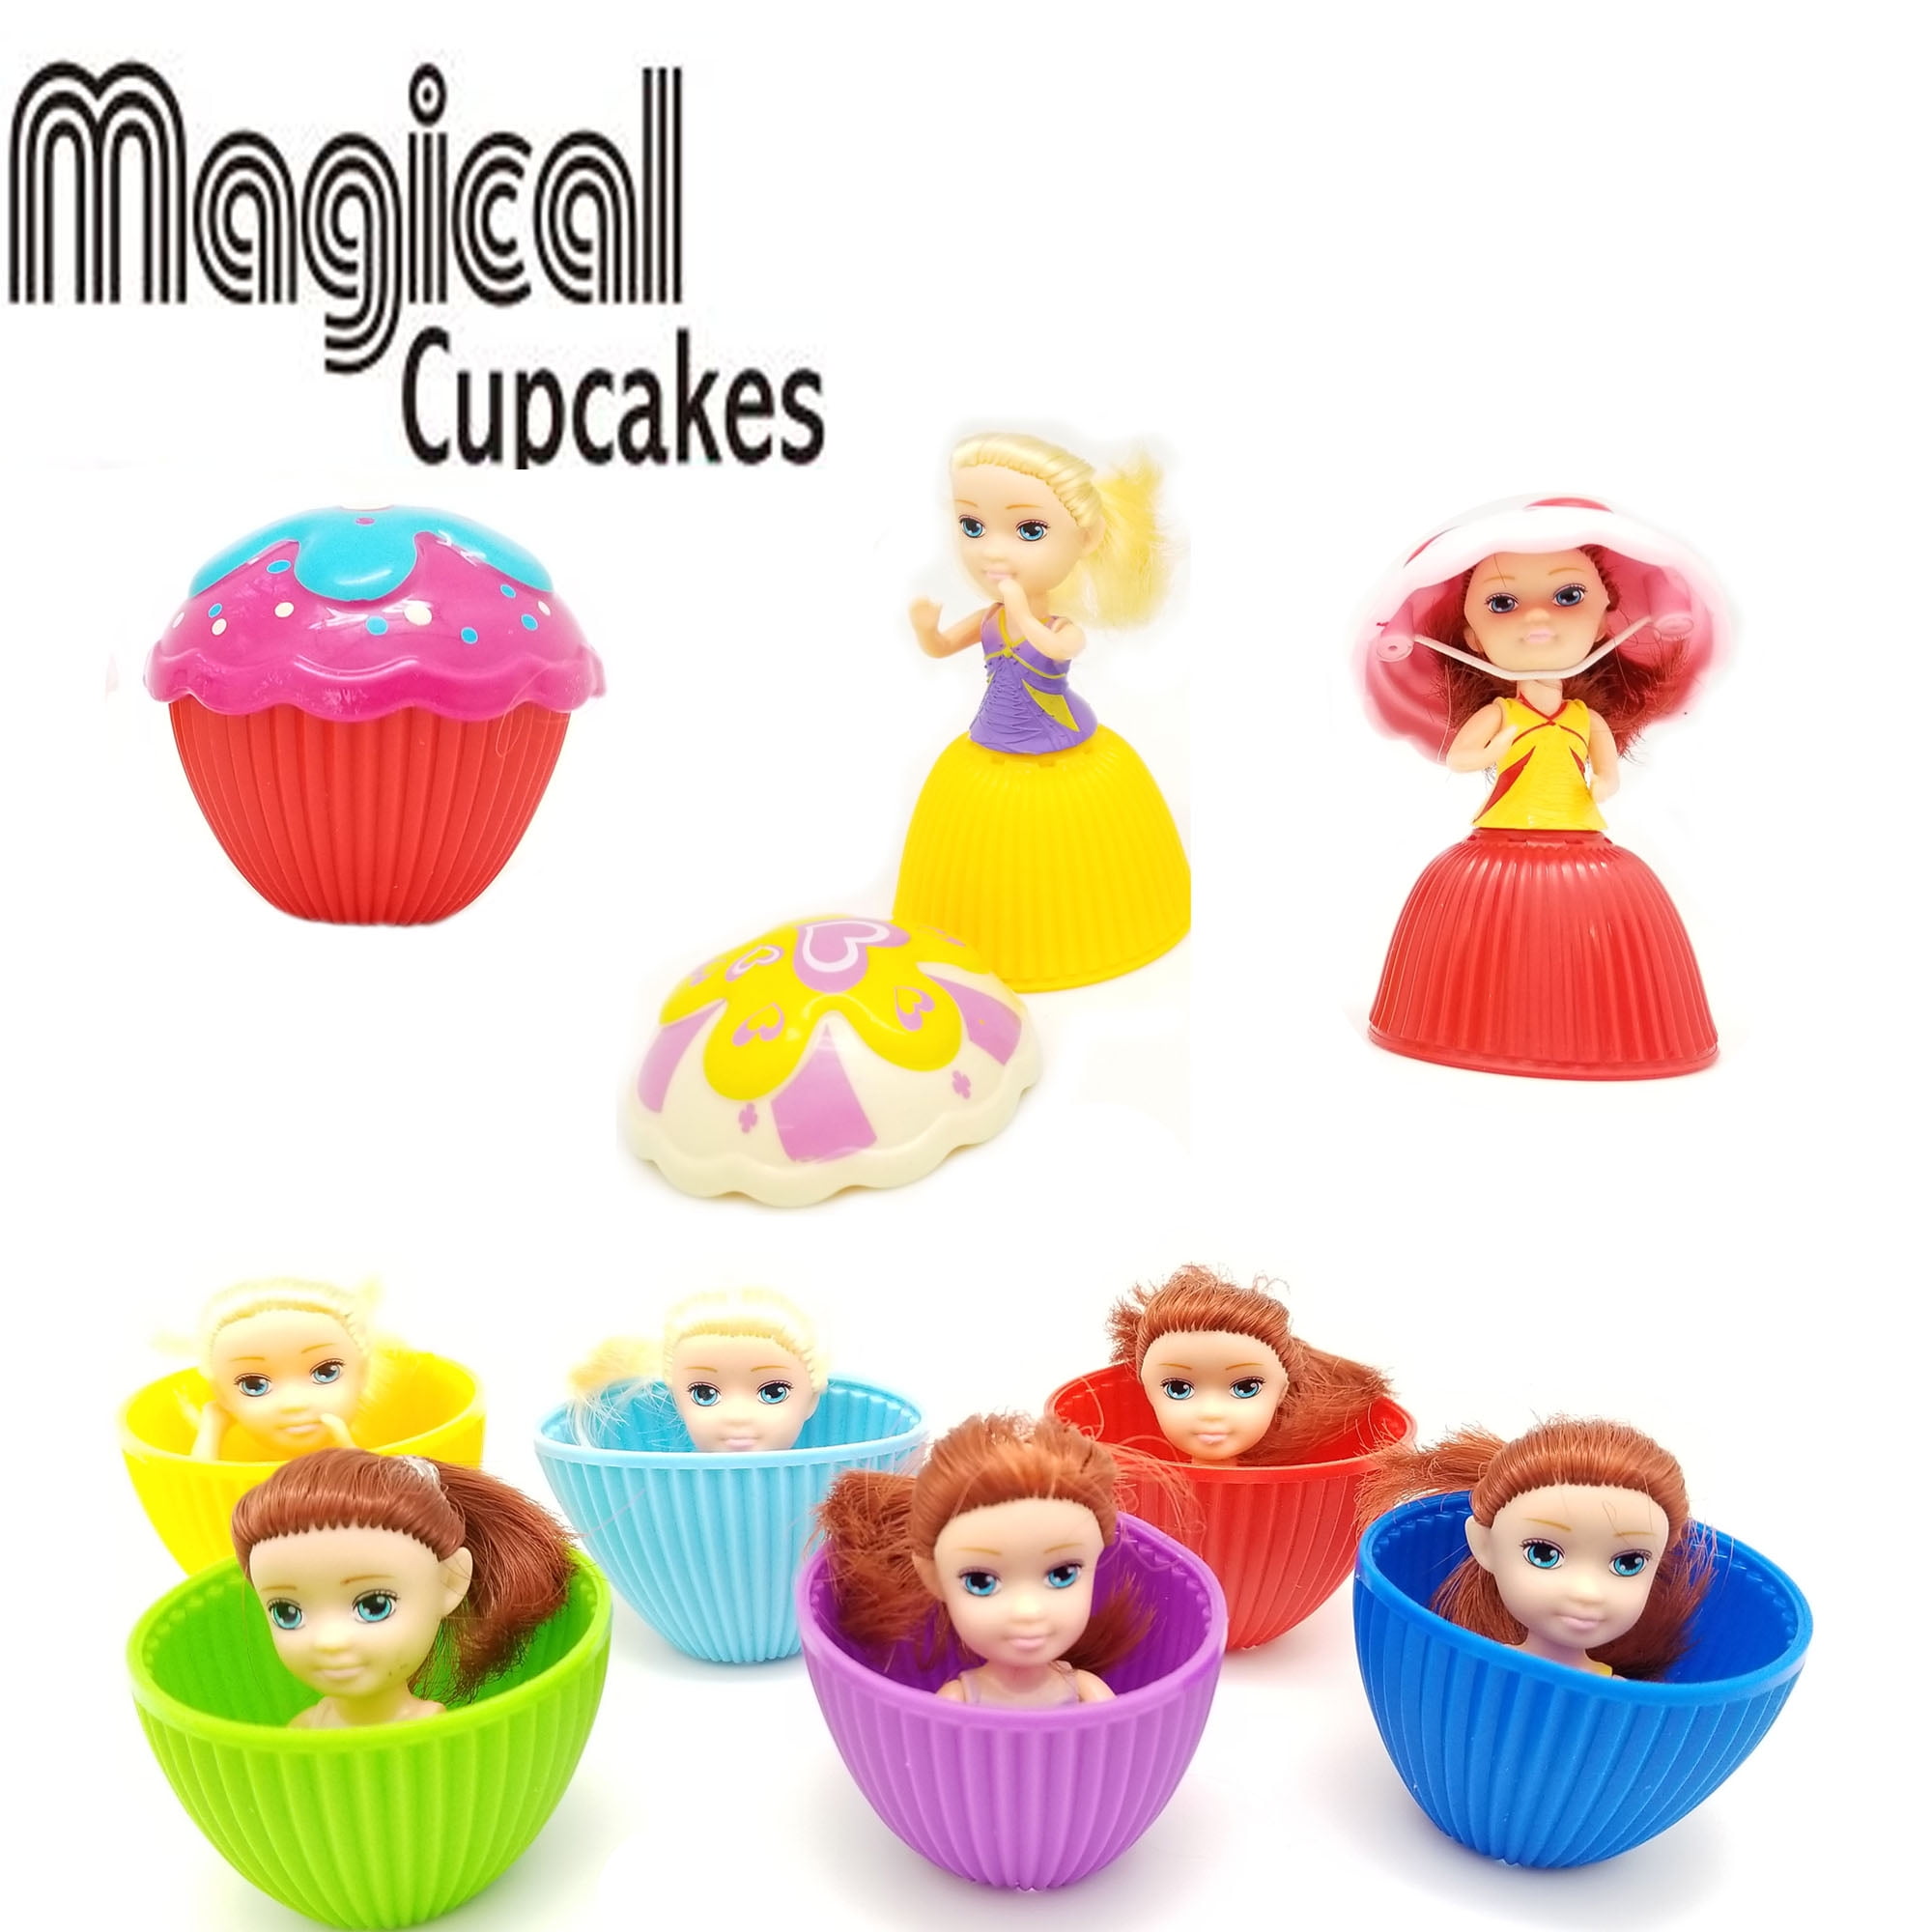 Mini Cupcake Surprise Princess Doll Scented Birthday Gift For Kids Girls Toy Z 